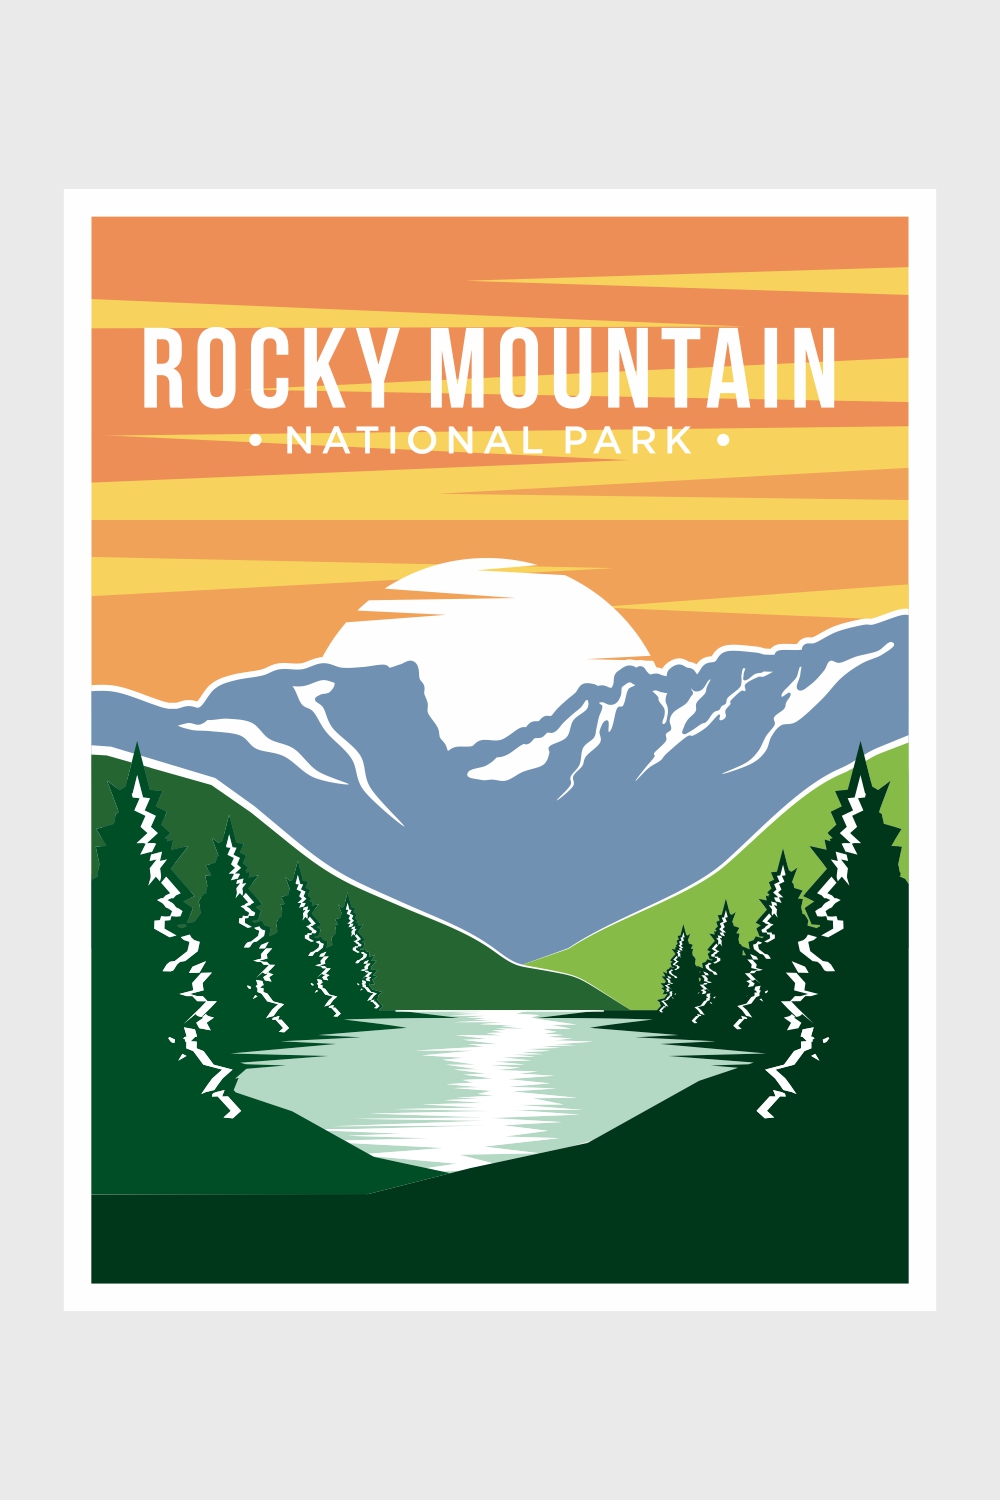 Rocky Mountain National Park poster vector illustration, beautiful mountains and river landscape poster - only $11 pinterest preview image.